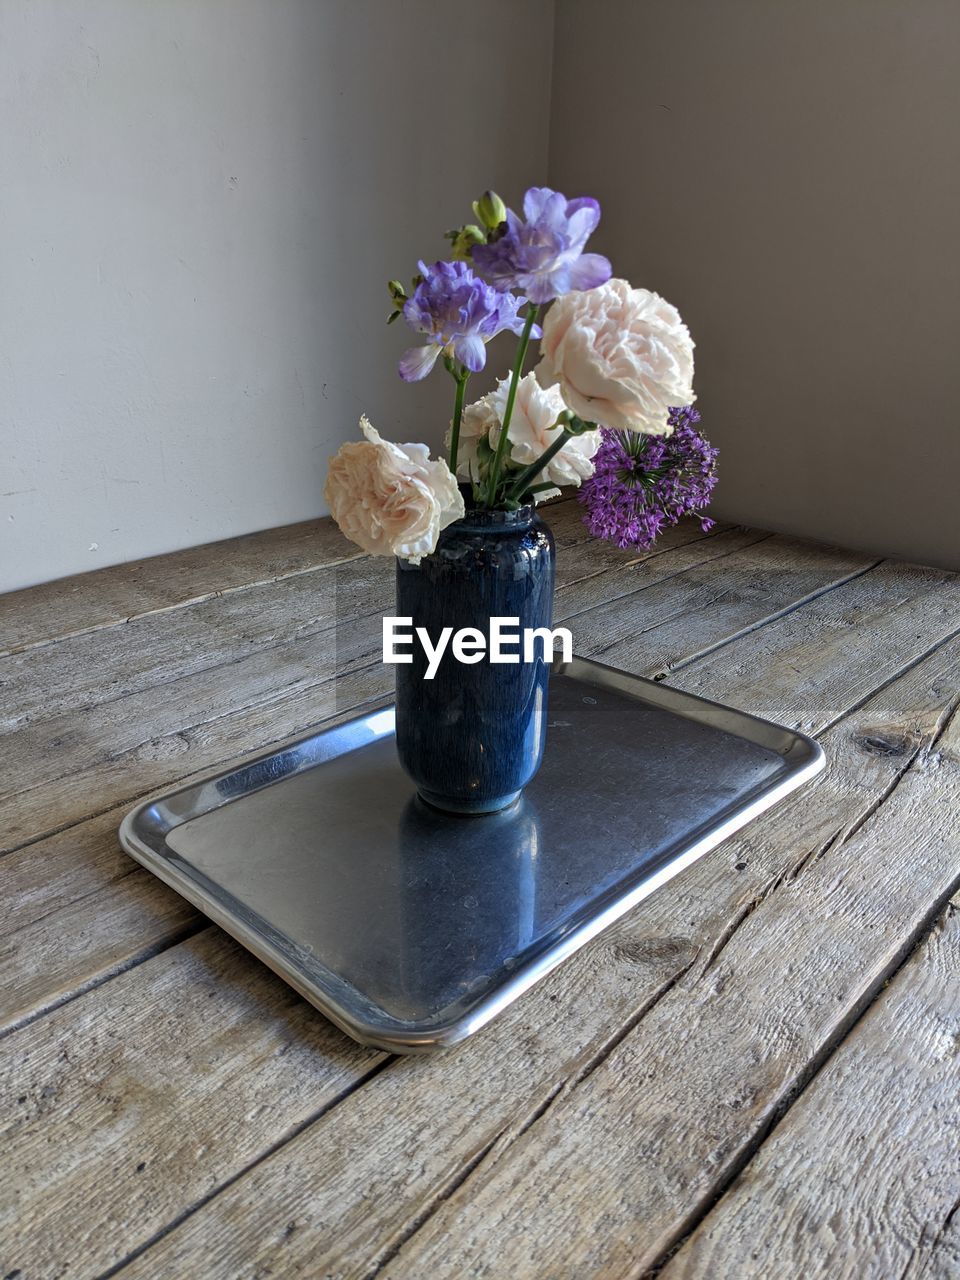 CLOSE-UP OF FLOWER VASE ON TABLE